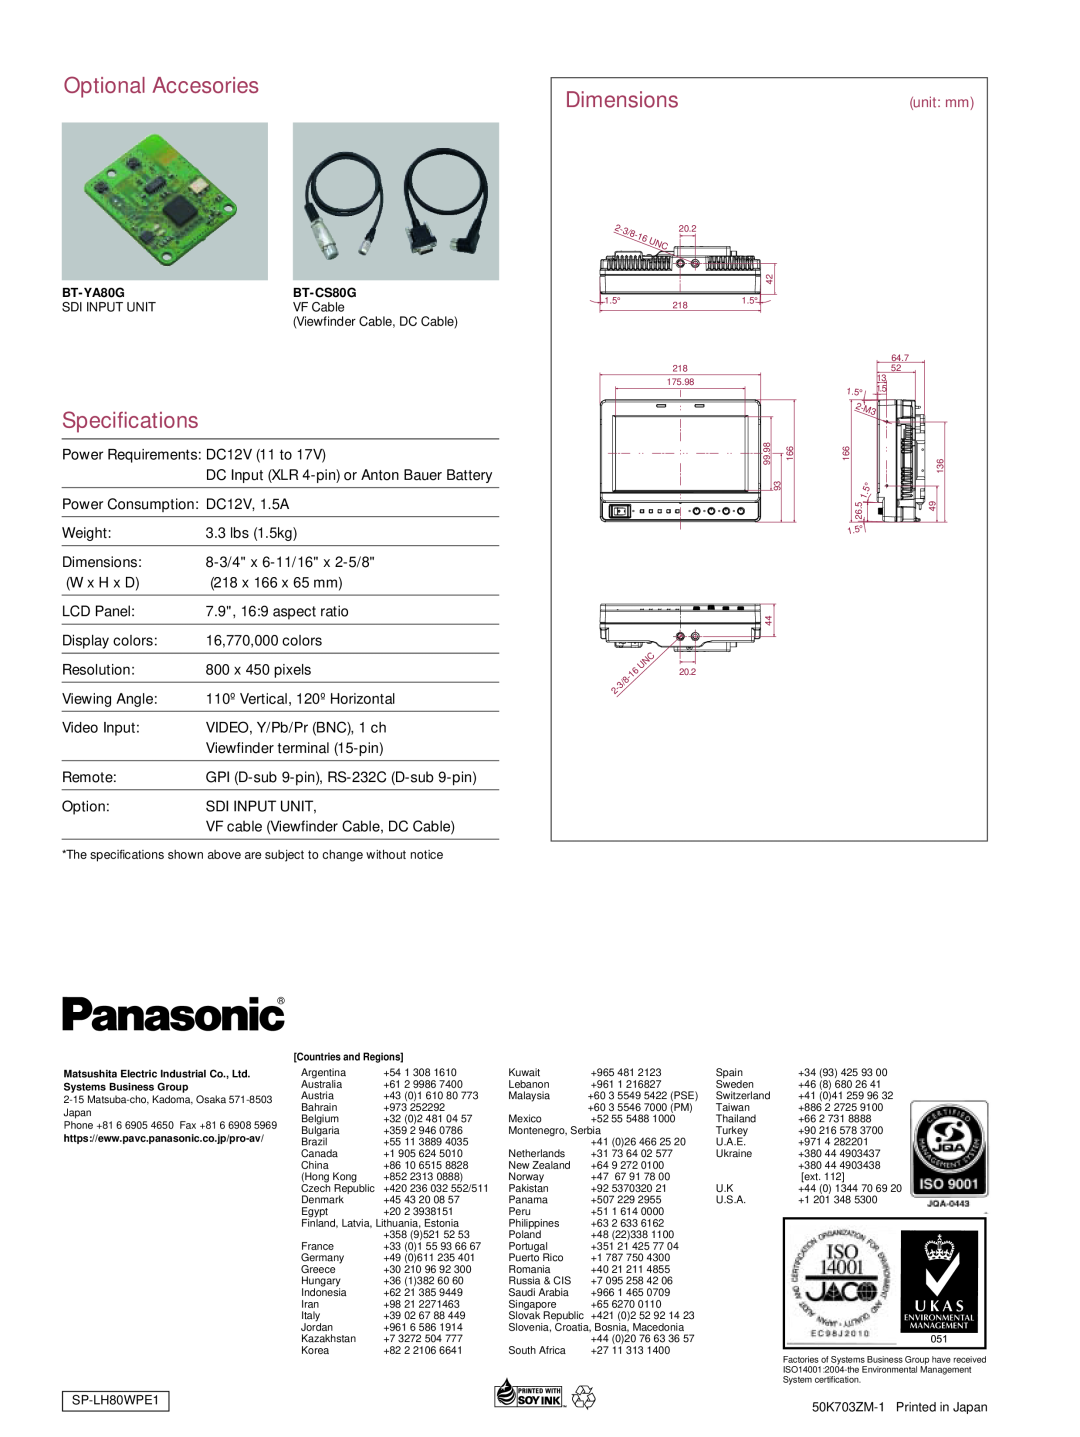 Panasonic BT-LH80W manual Optional Accesories, Specifications, Dimensions, unit mm 